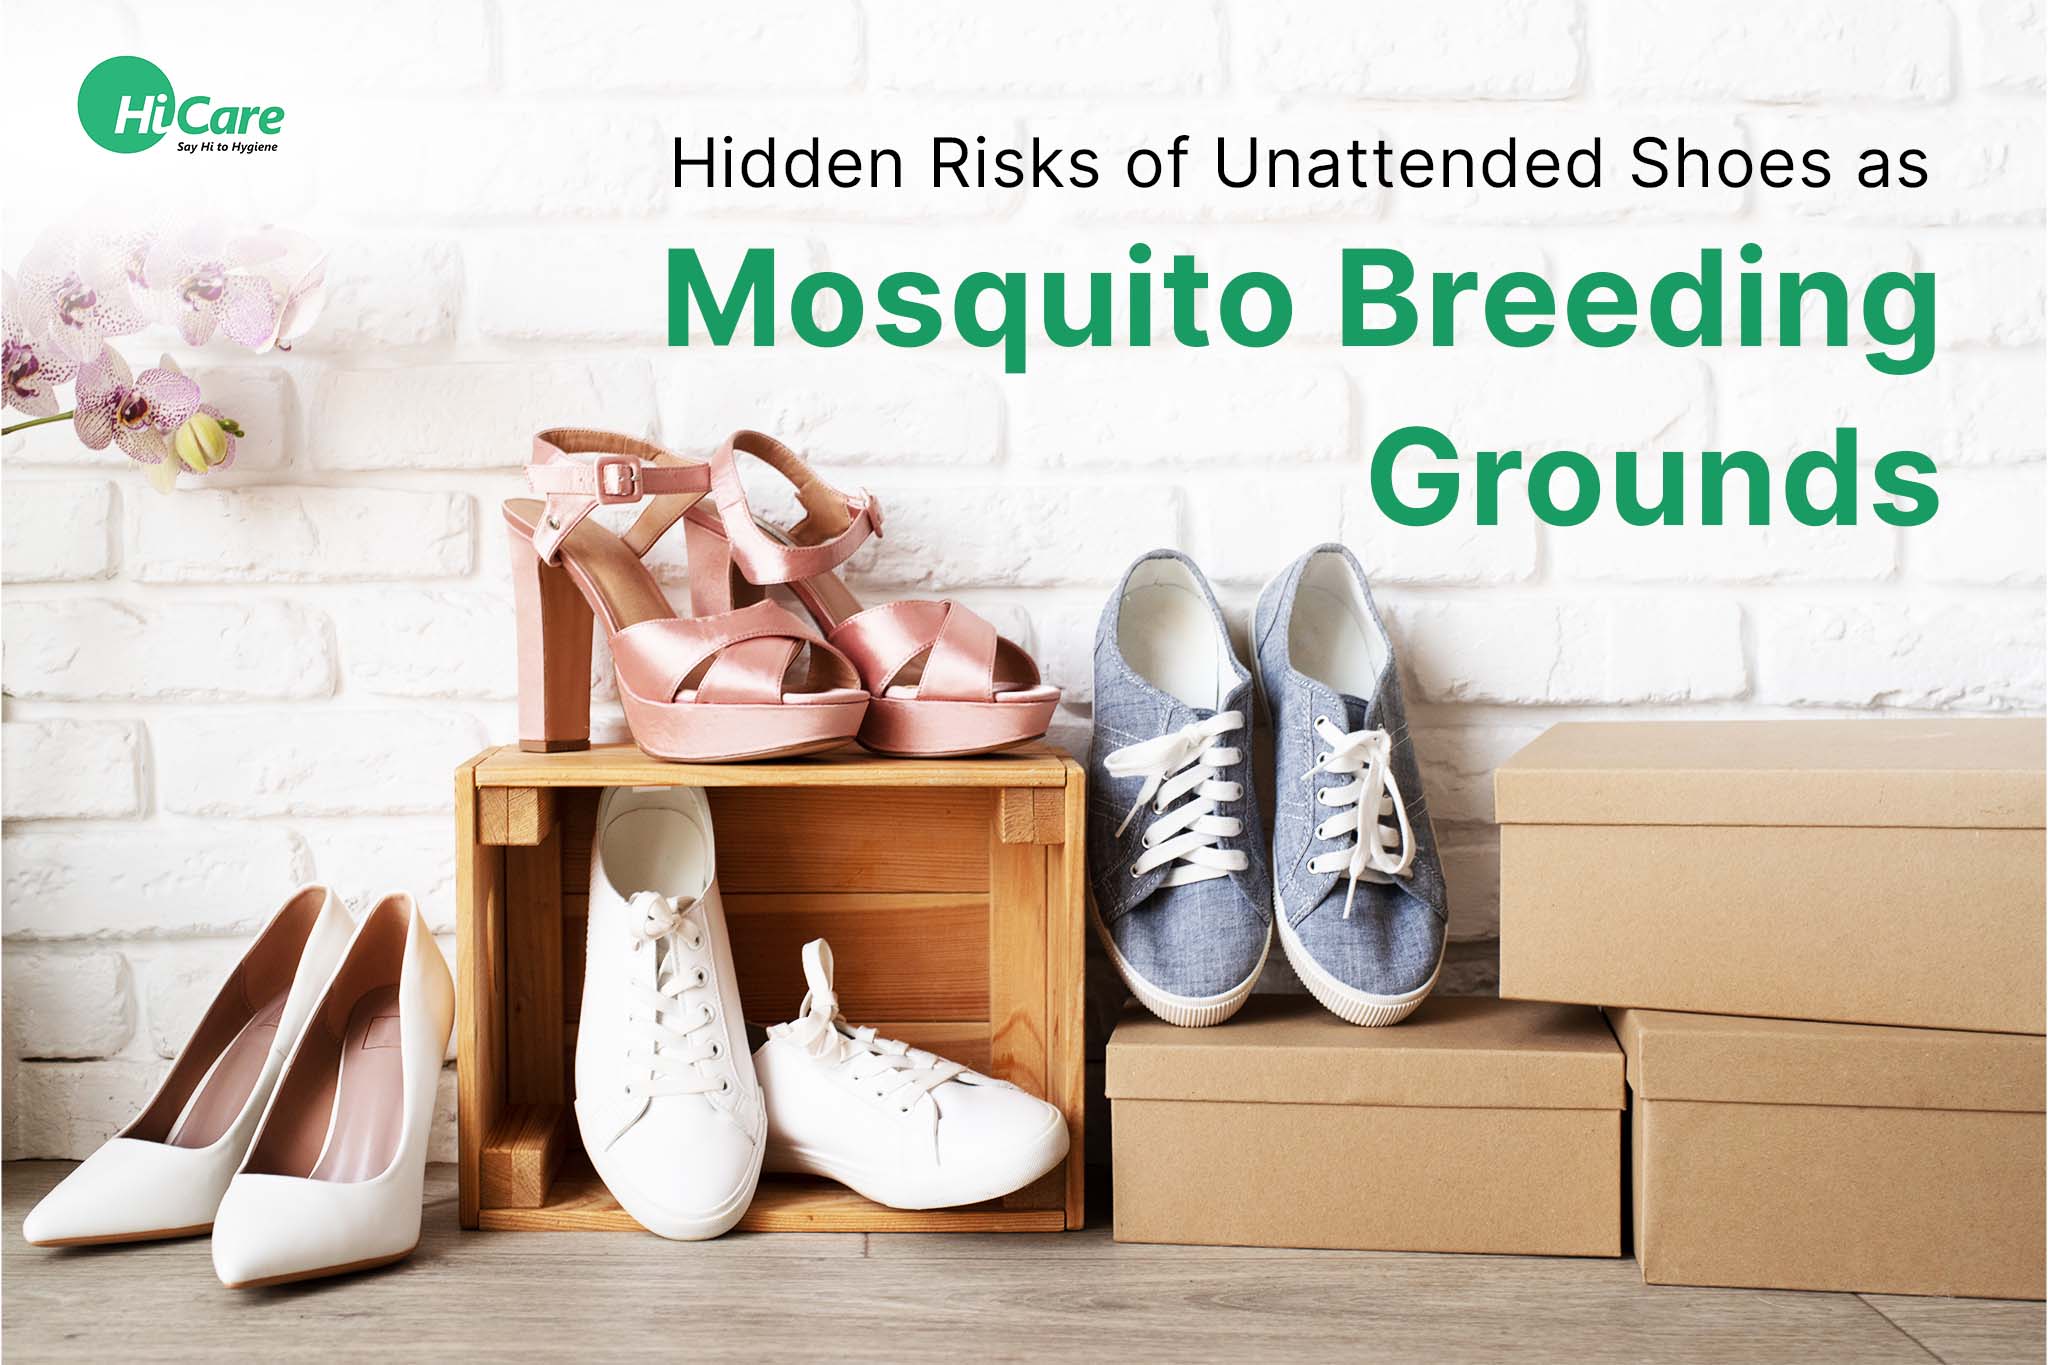 Hidden Risks of Unattended Shoes as Mosquito Breeding Grounds